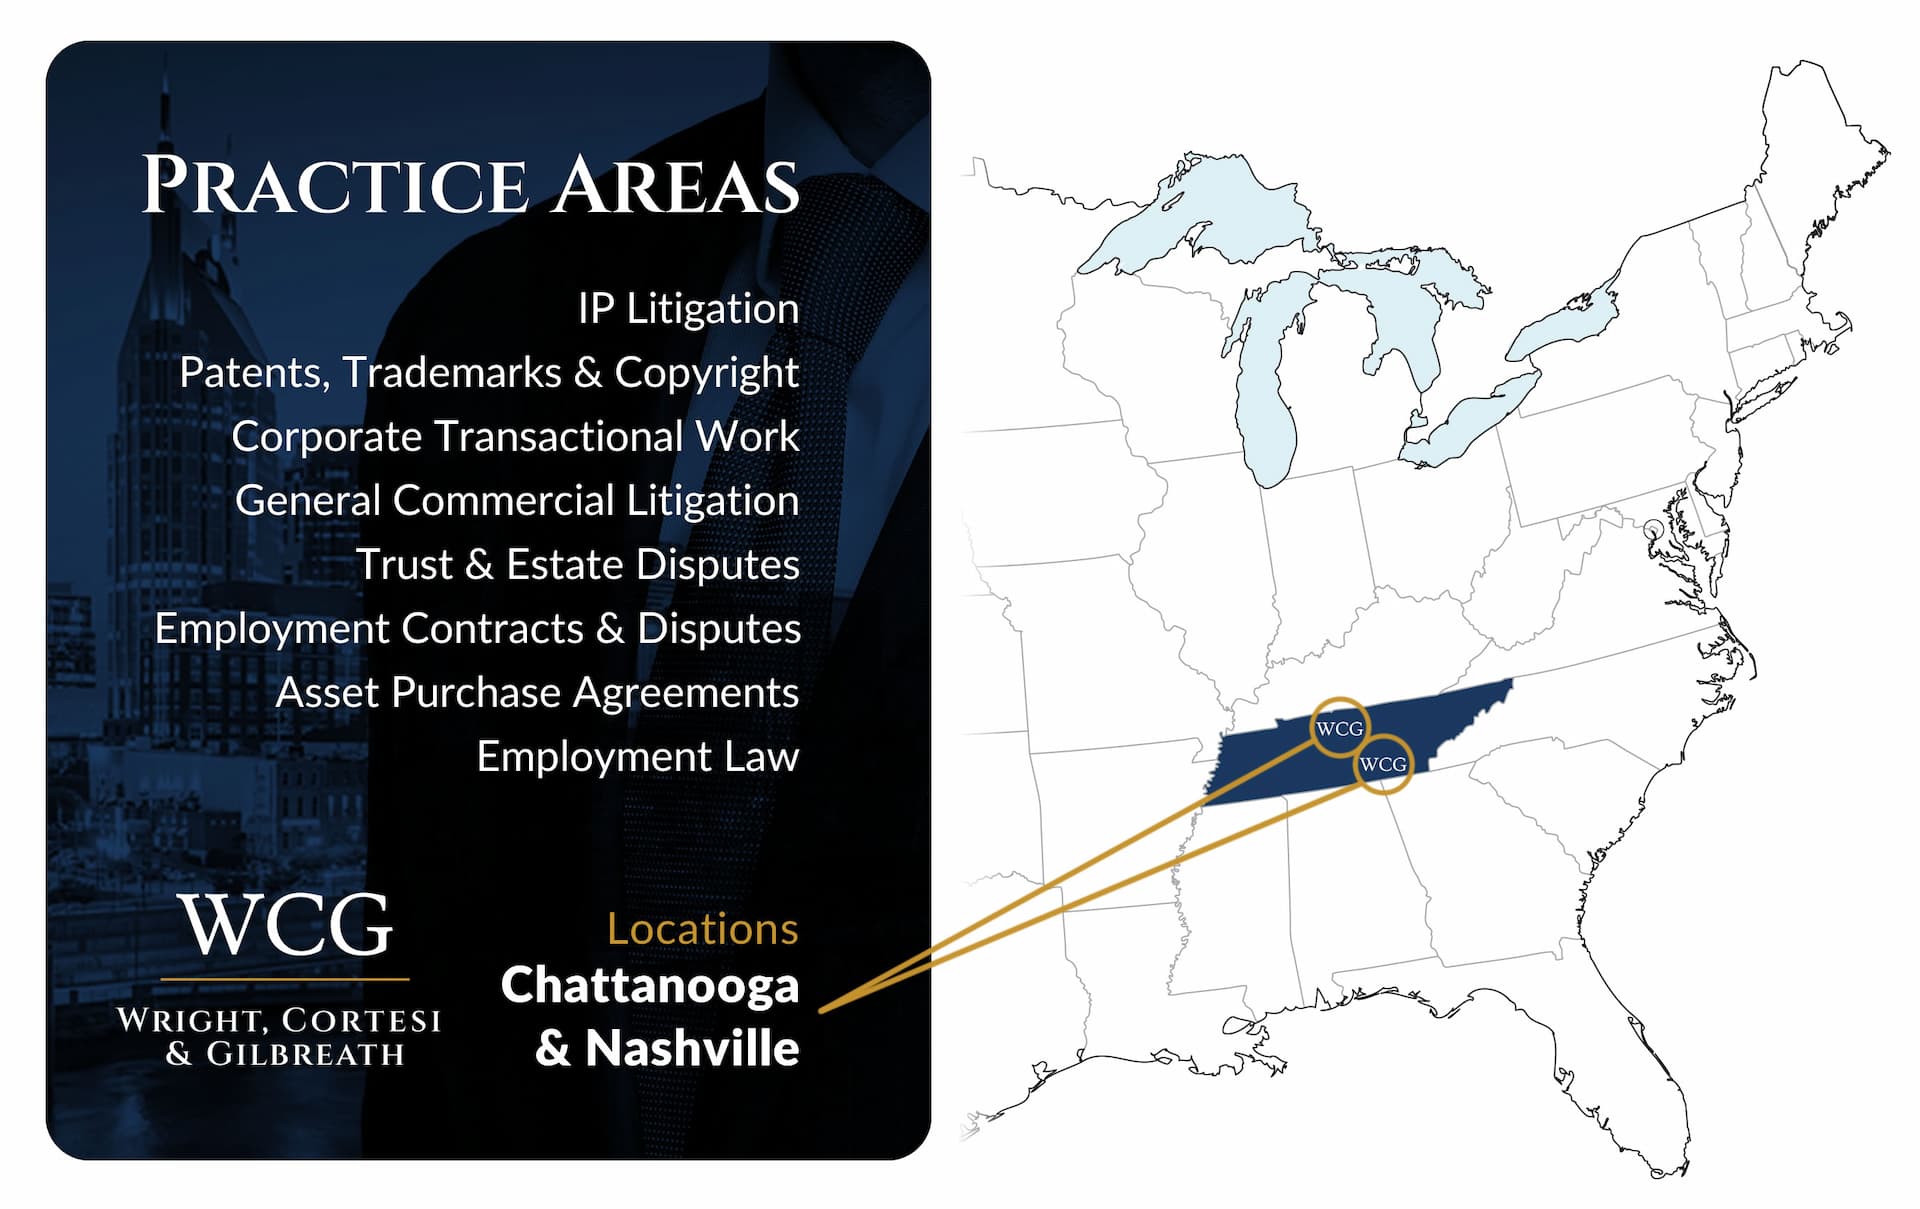 wcg-legal-wright-cortesi-and-gilbreath-chattanooga-nashville-ip-lawyers-cta-1-opt